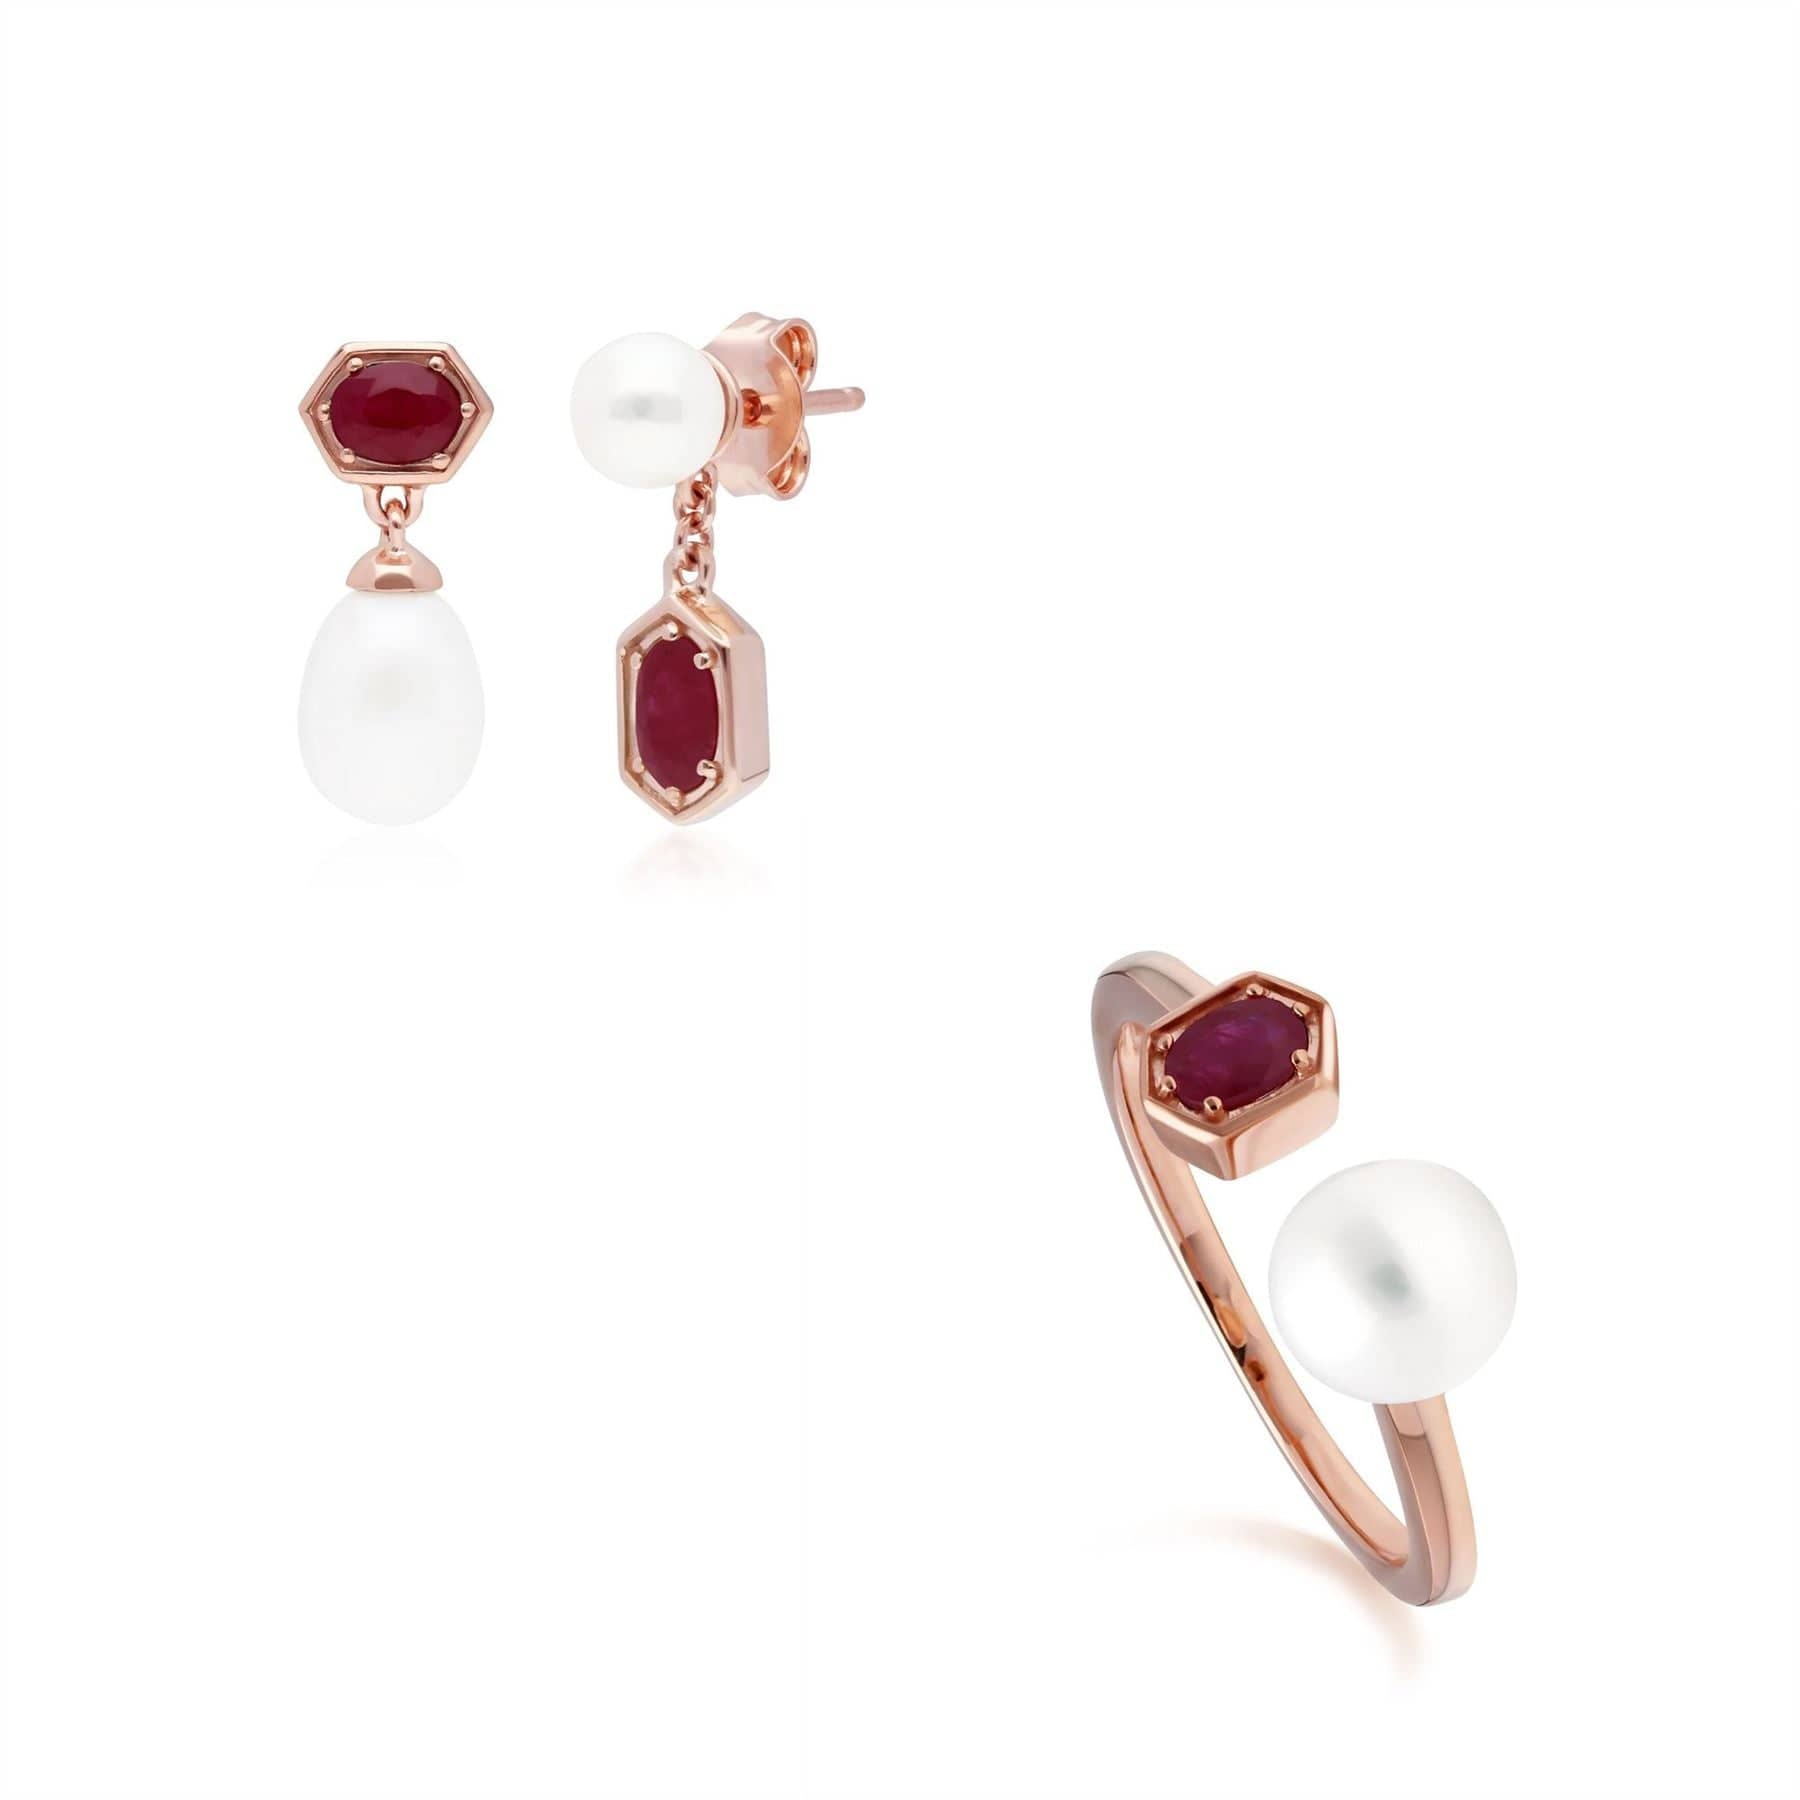 Modern Pearl & Ruby Earring & Ring Set in Rose Gold Plated Silver - Gemondo